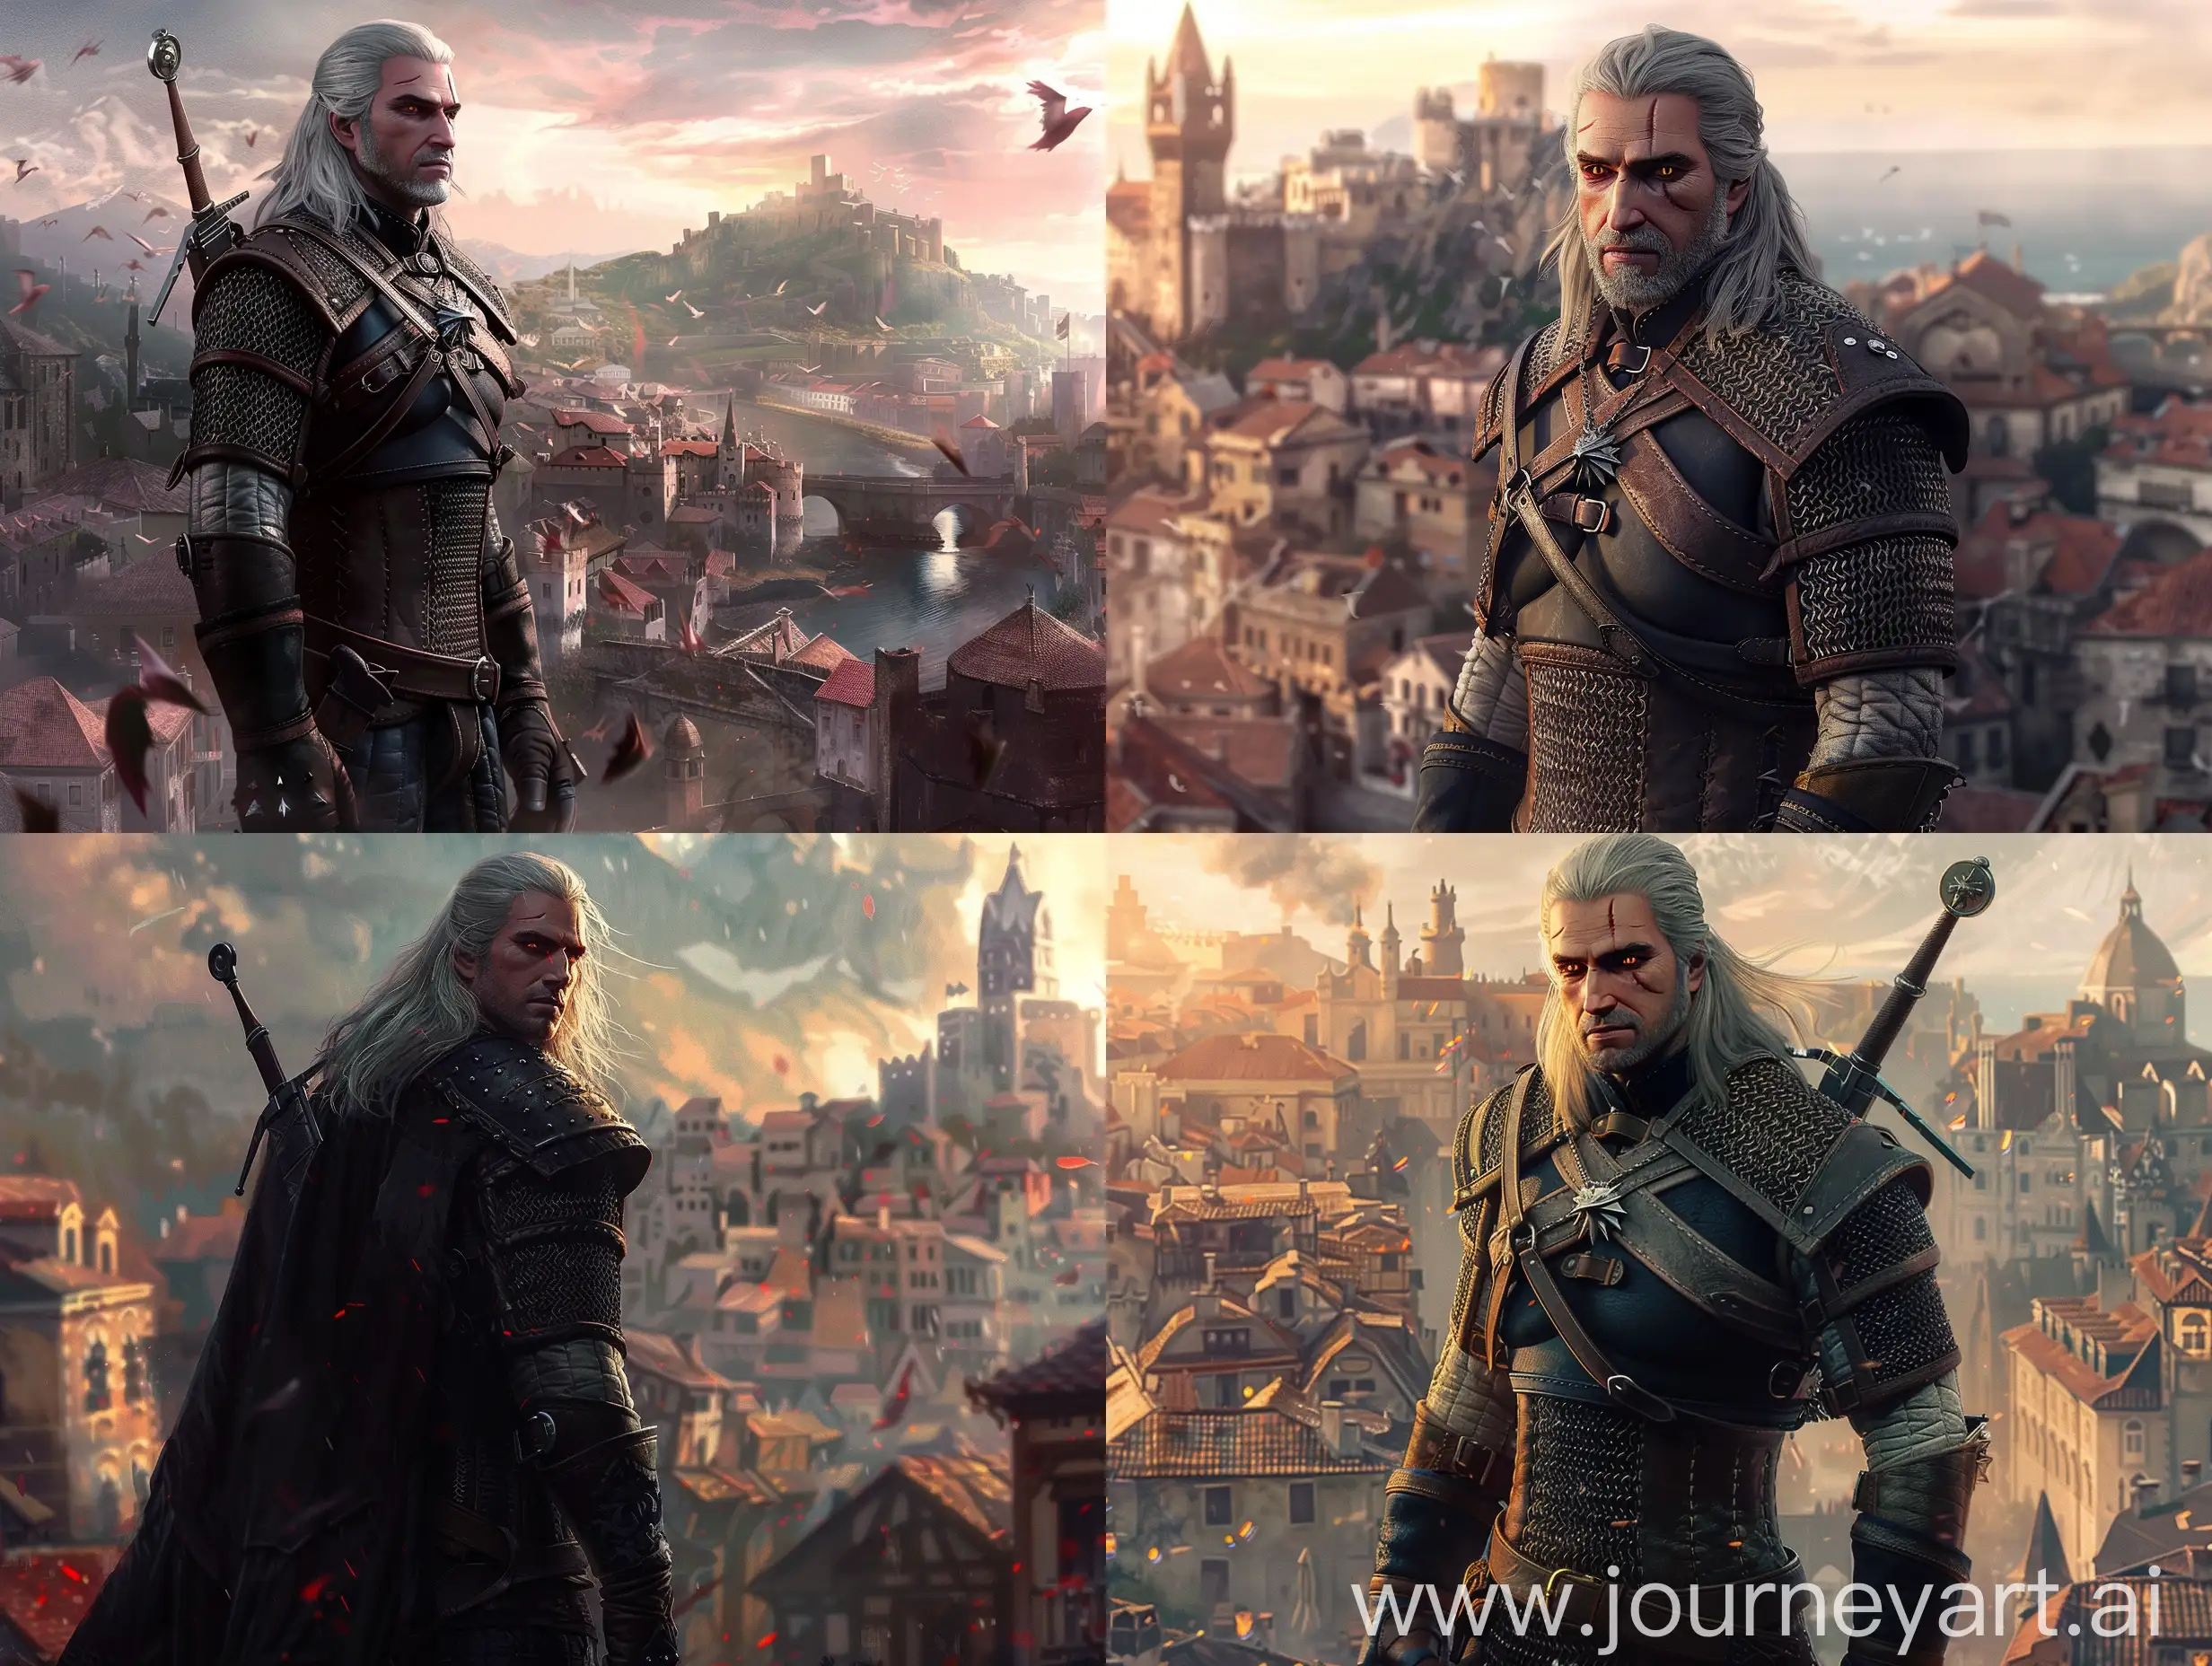 Realistic-Witcher-Geralt-Standing-Tall-in-Detailed-City-Background